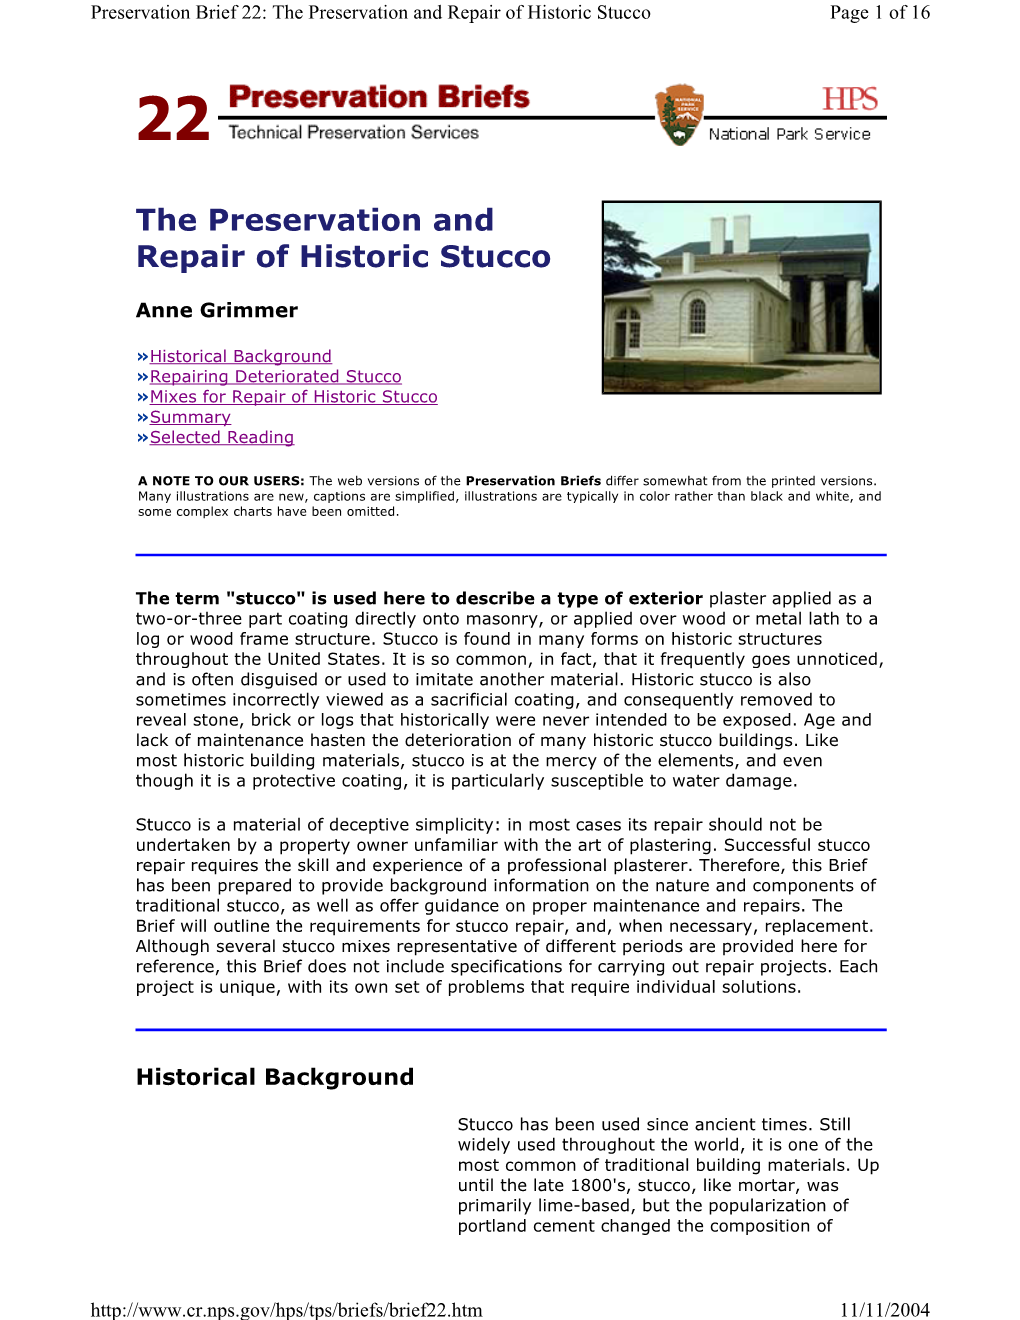 The Preservation and Repair of Historic Stucco Page 1 of 16